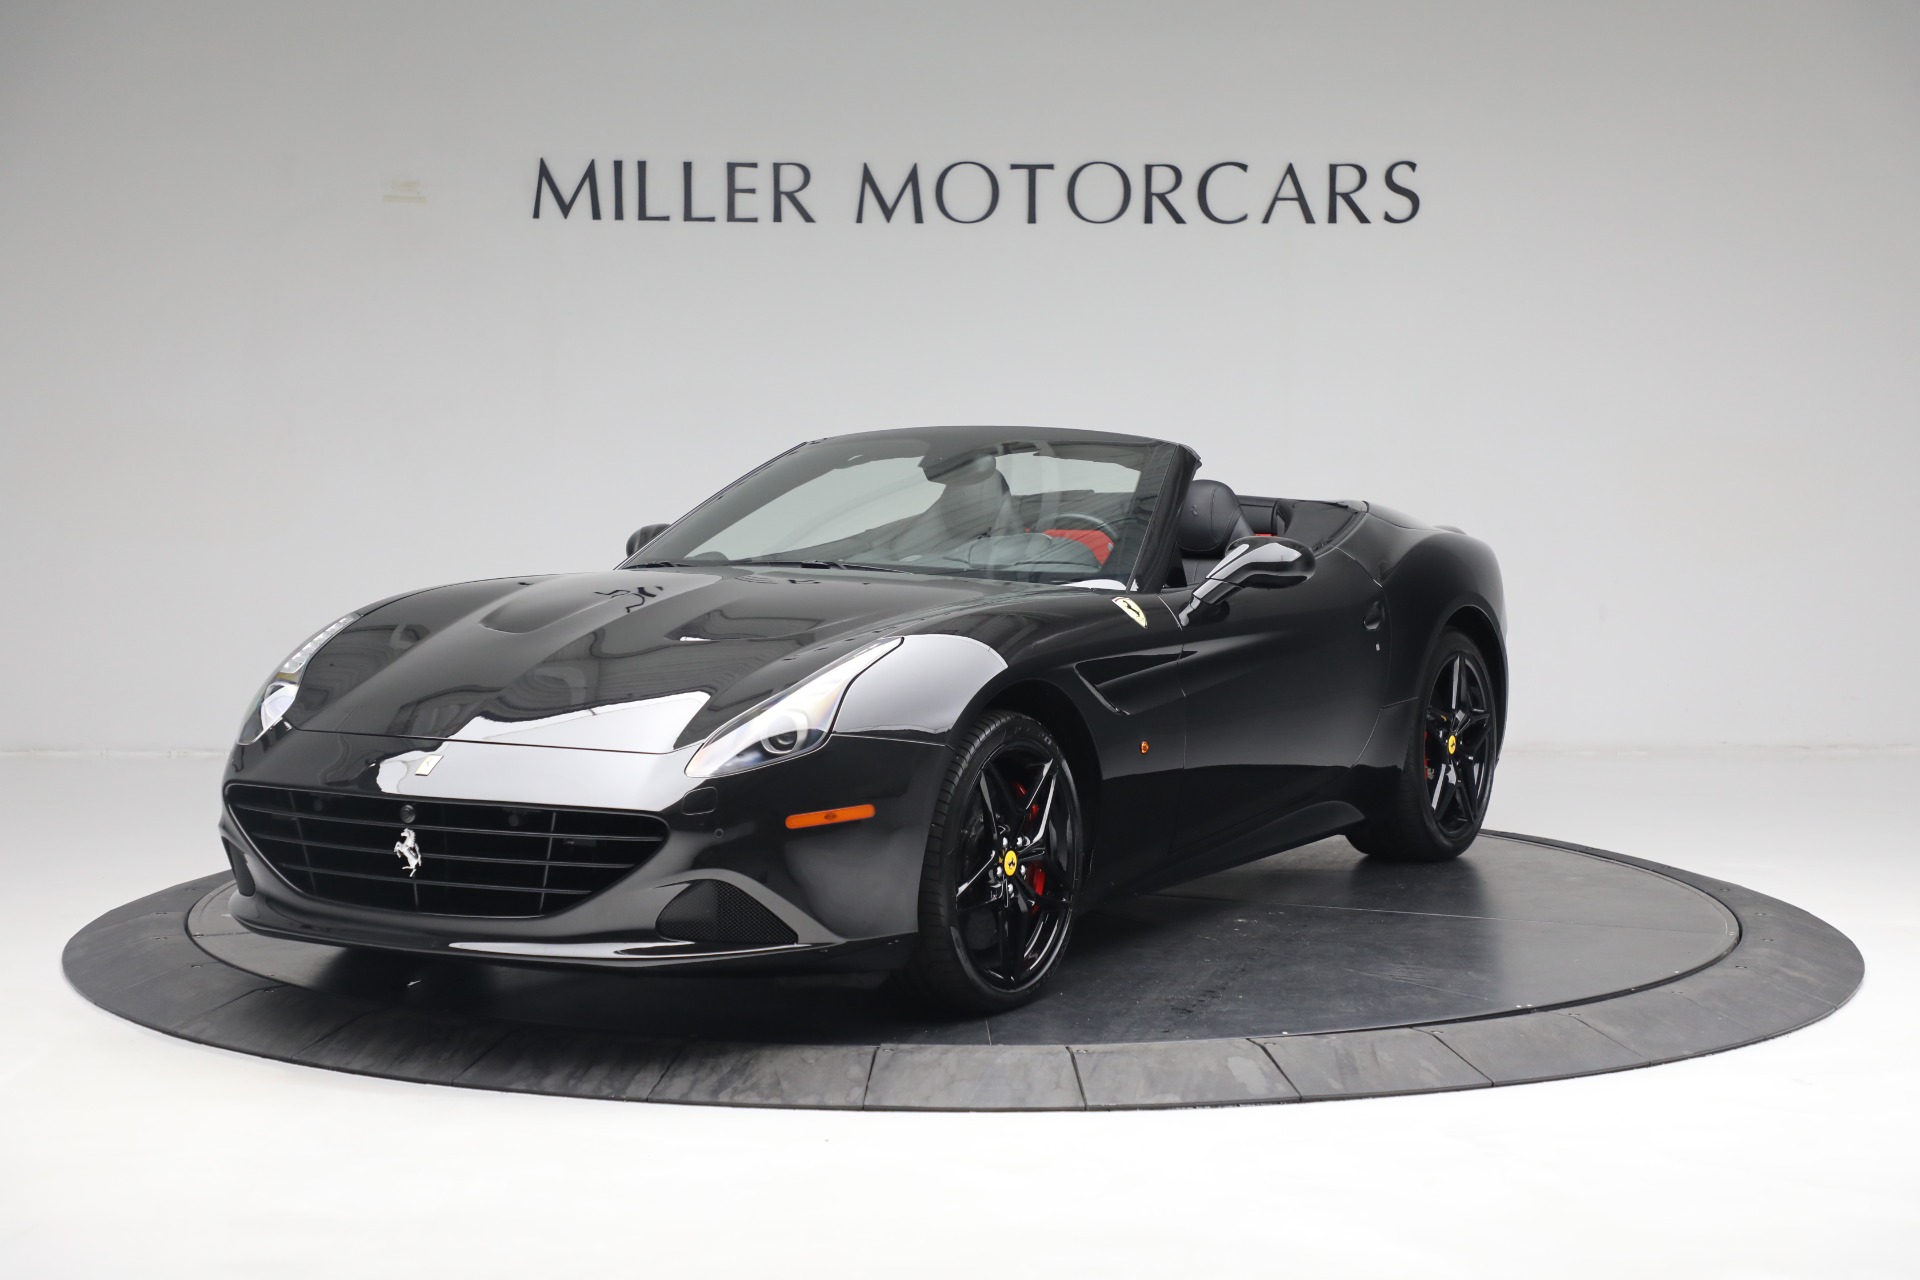 Used 2016 Ferrari California T for sale Sold at Bentley Greenwich in Greenwich CT 06830 1